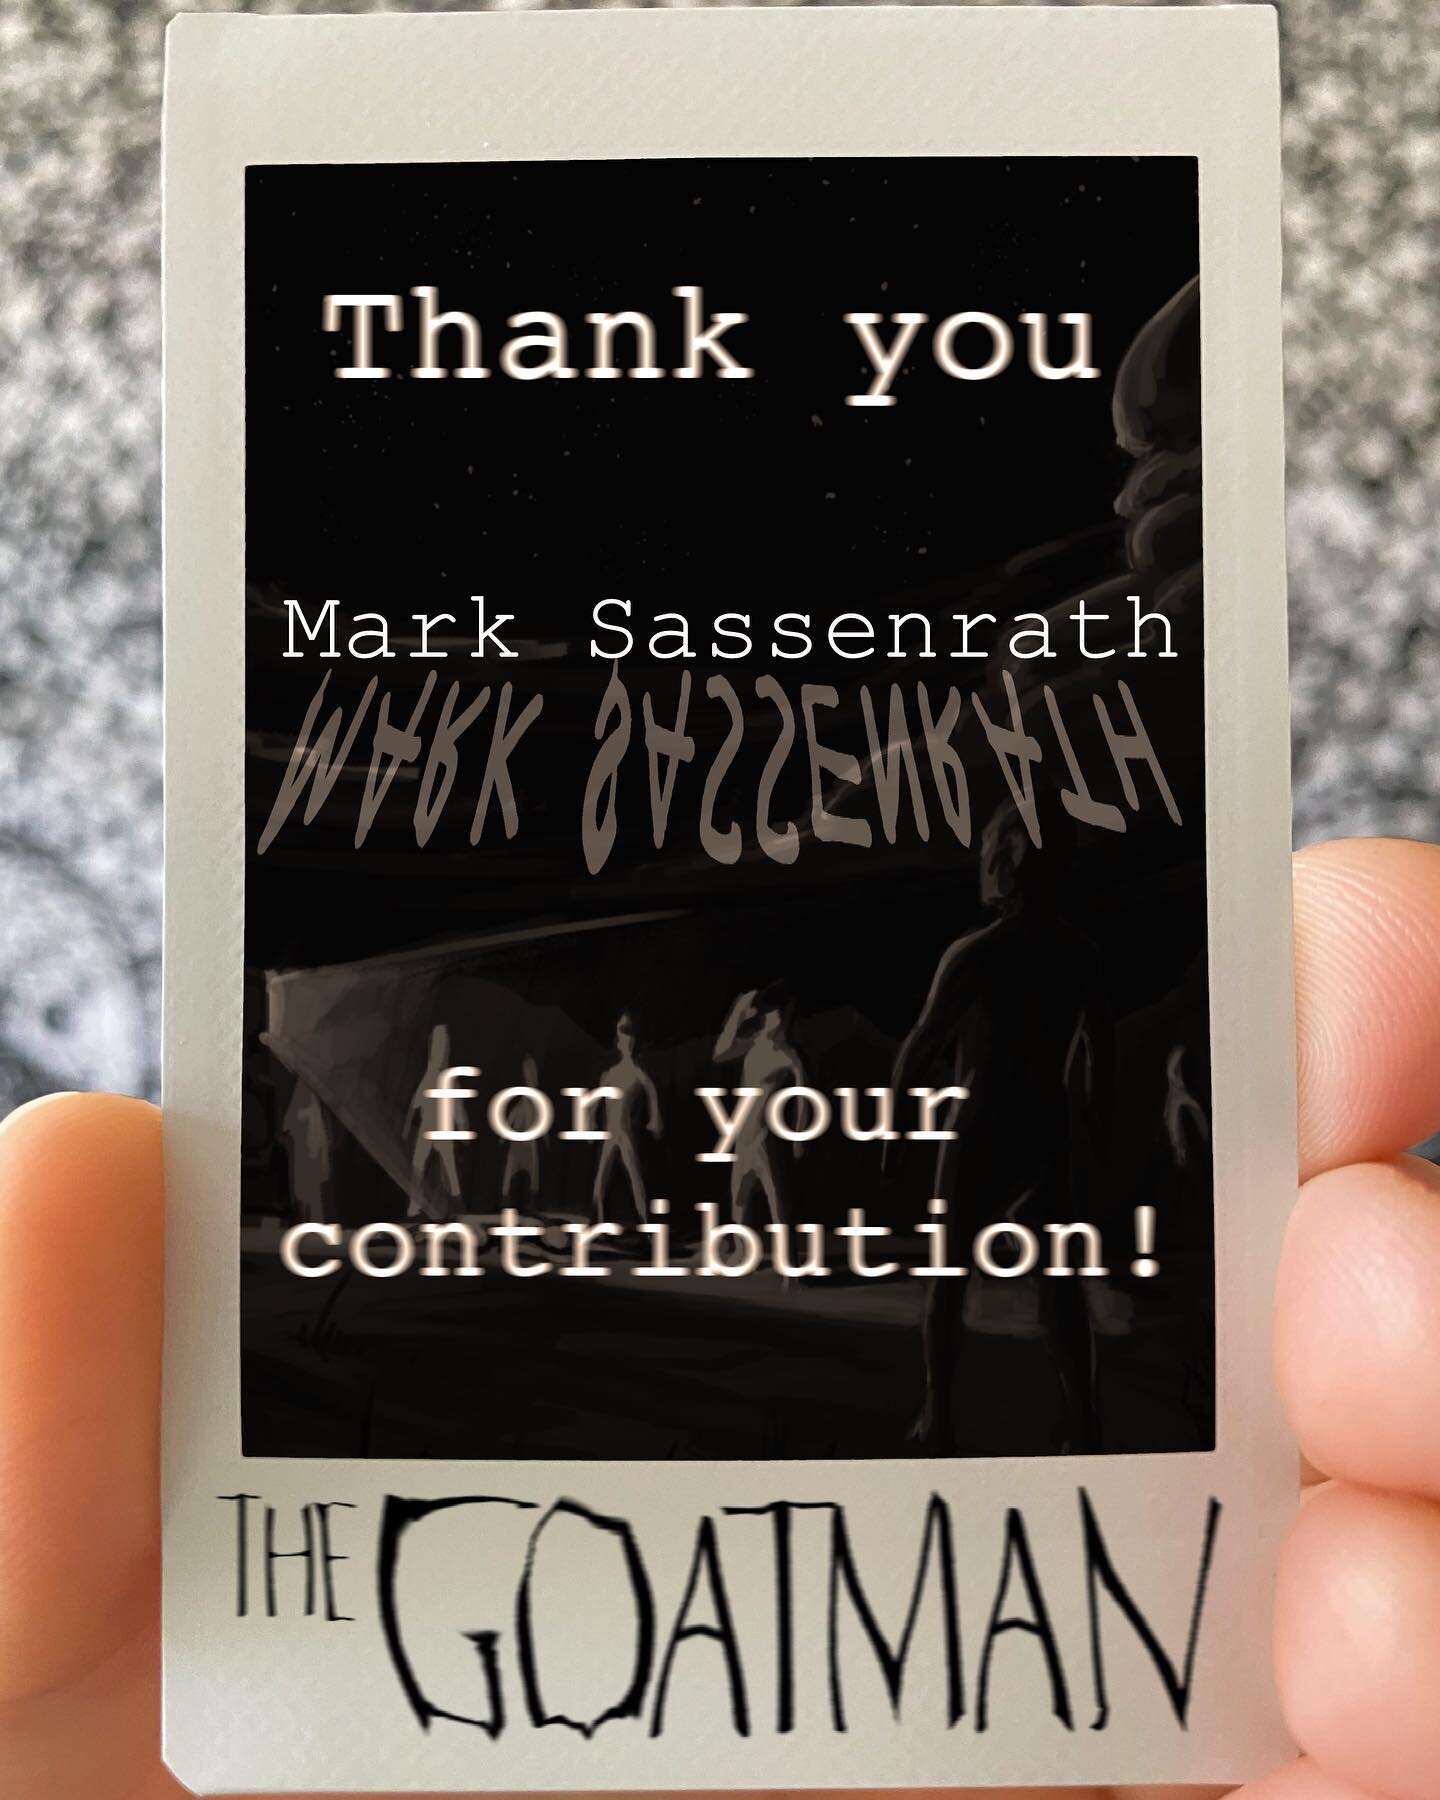 Thank you, Mark, for supporting the project and helping us make a movie! 🧡

#🐐 #indiehorror #indiefilmmaking #indiehorrorfilm #crowdfunding